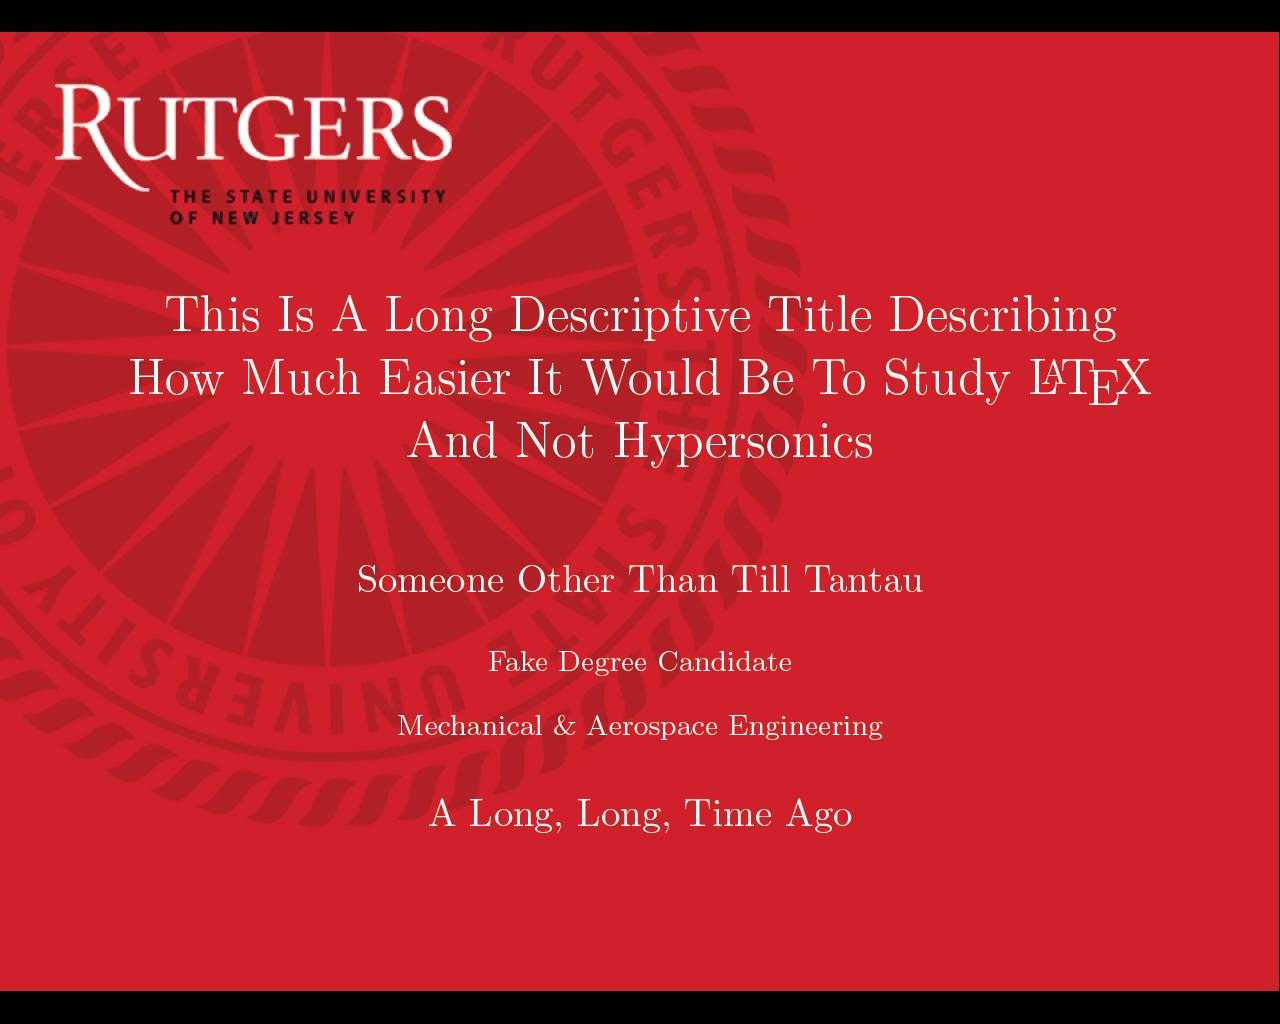 Can I Specify Title Page Customization In A Template Instead Intended For Rutgers Powerpoint Template